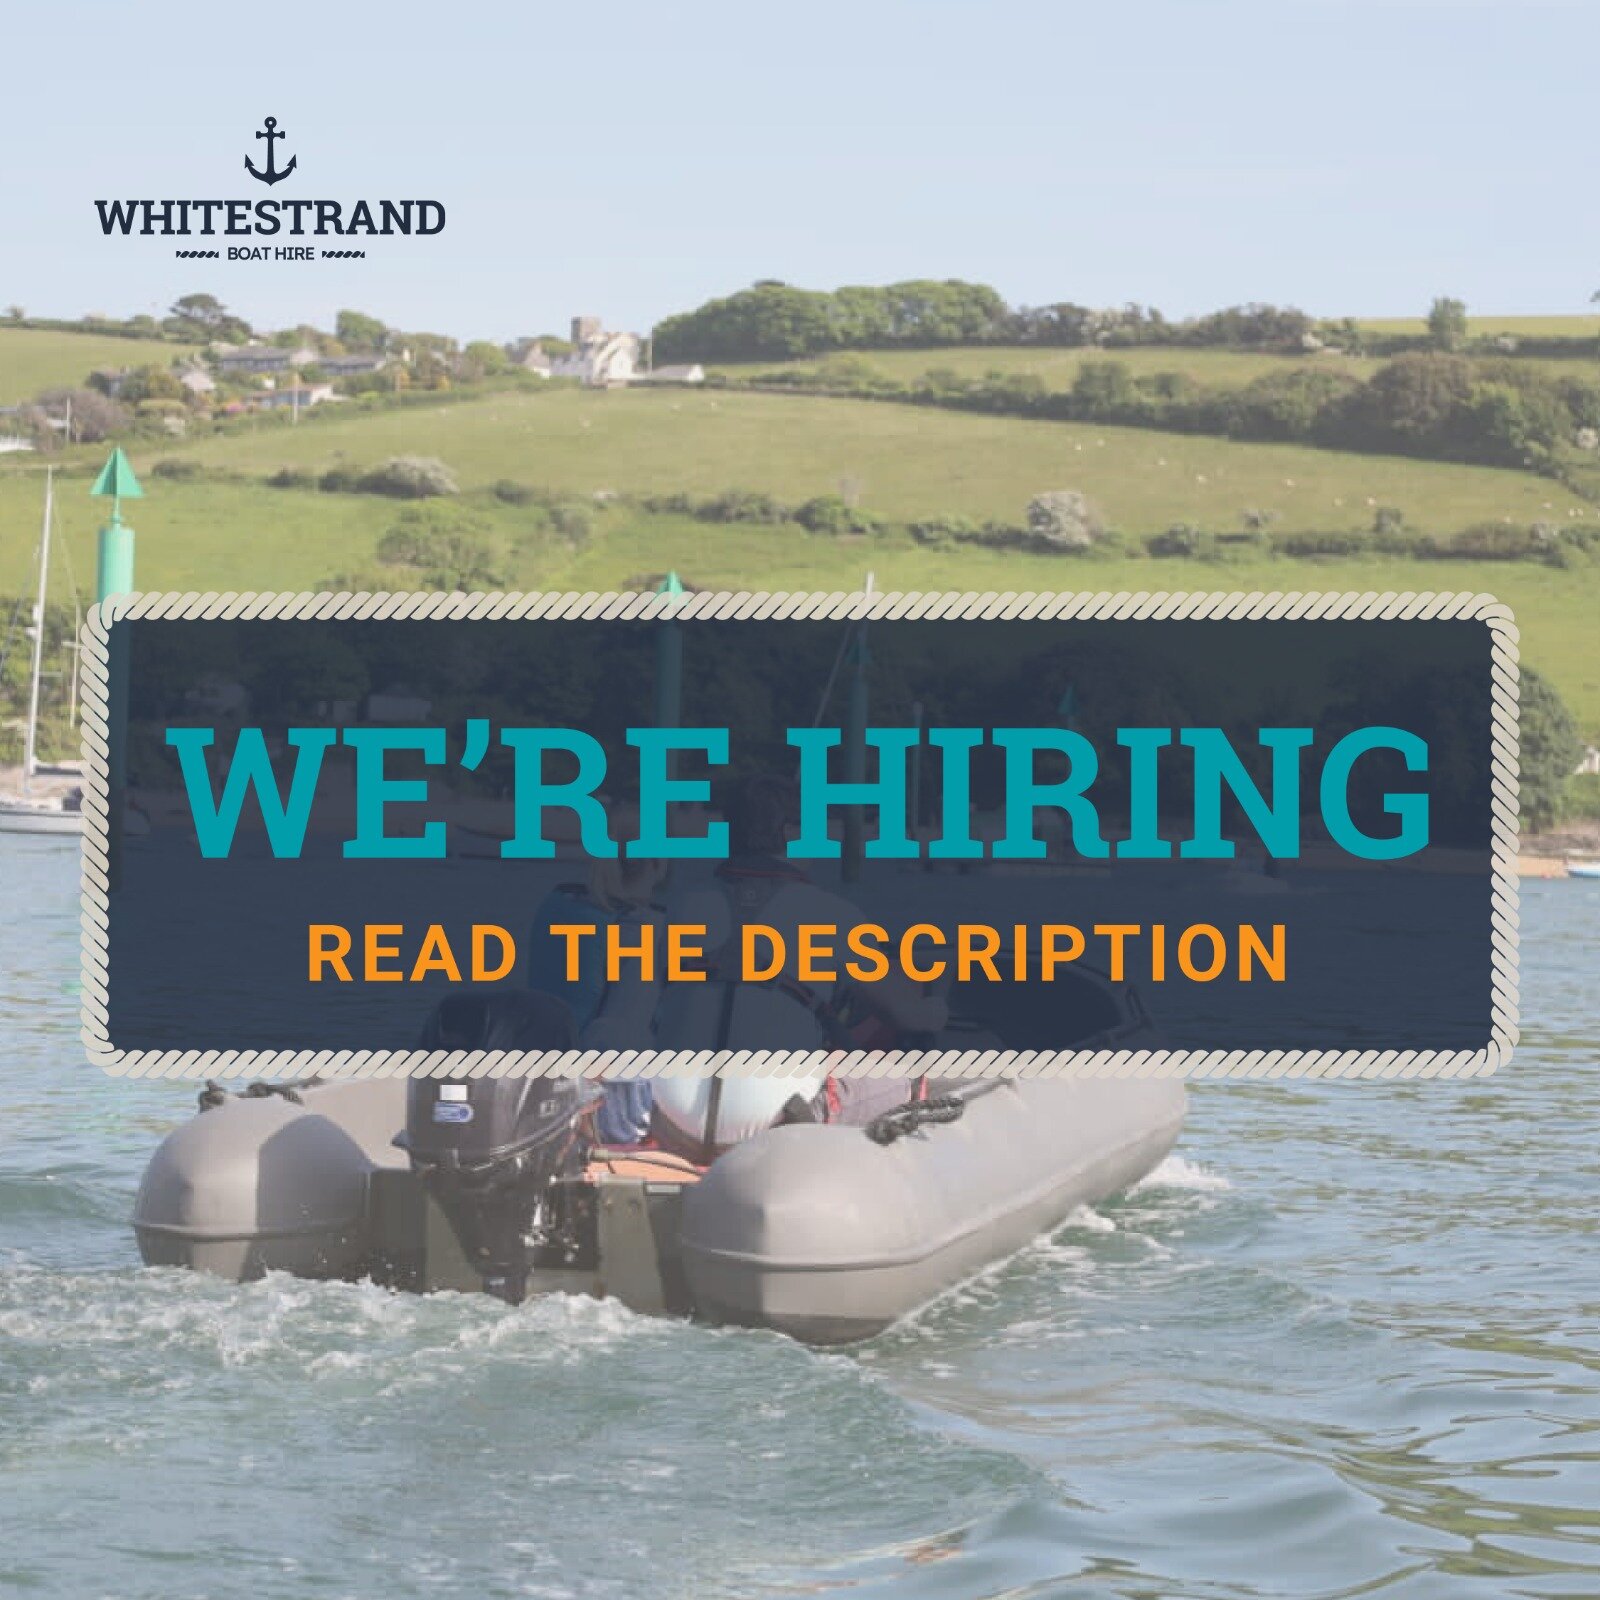 3 Positions available

PONTOON BOATMAN 
18+ 
Responsibilities include but not limited to
Ensuring boats are clean and ready for hire 
Completing safety briefings and handovers 
ensuring boats are moored and put away correctly at the end of a shift

P